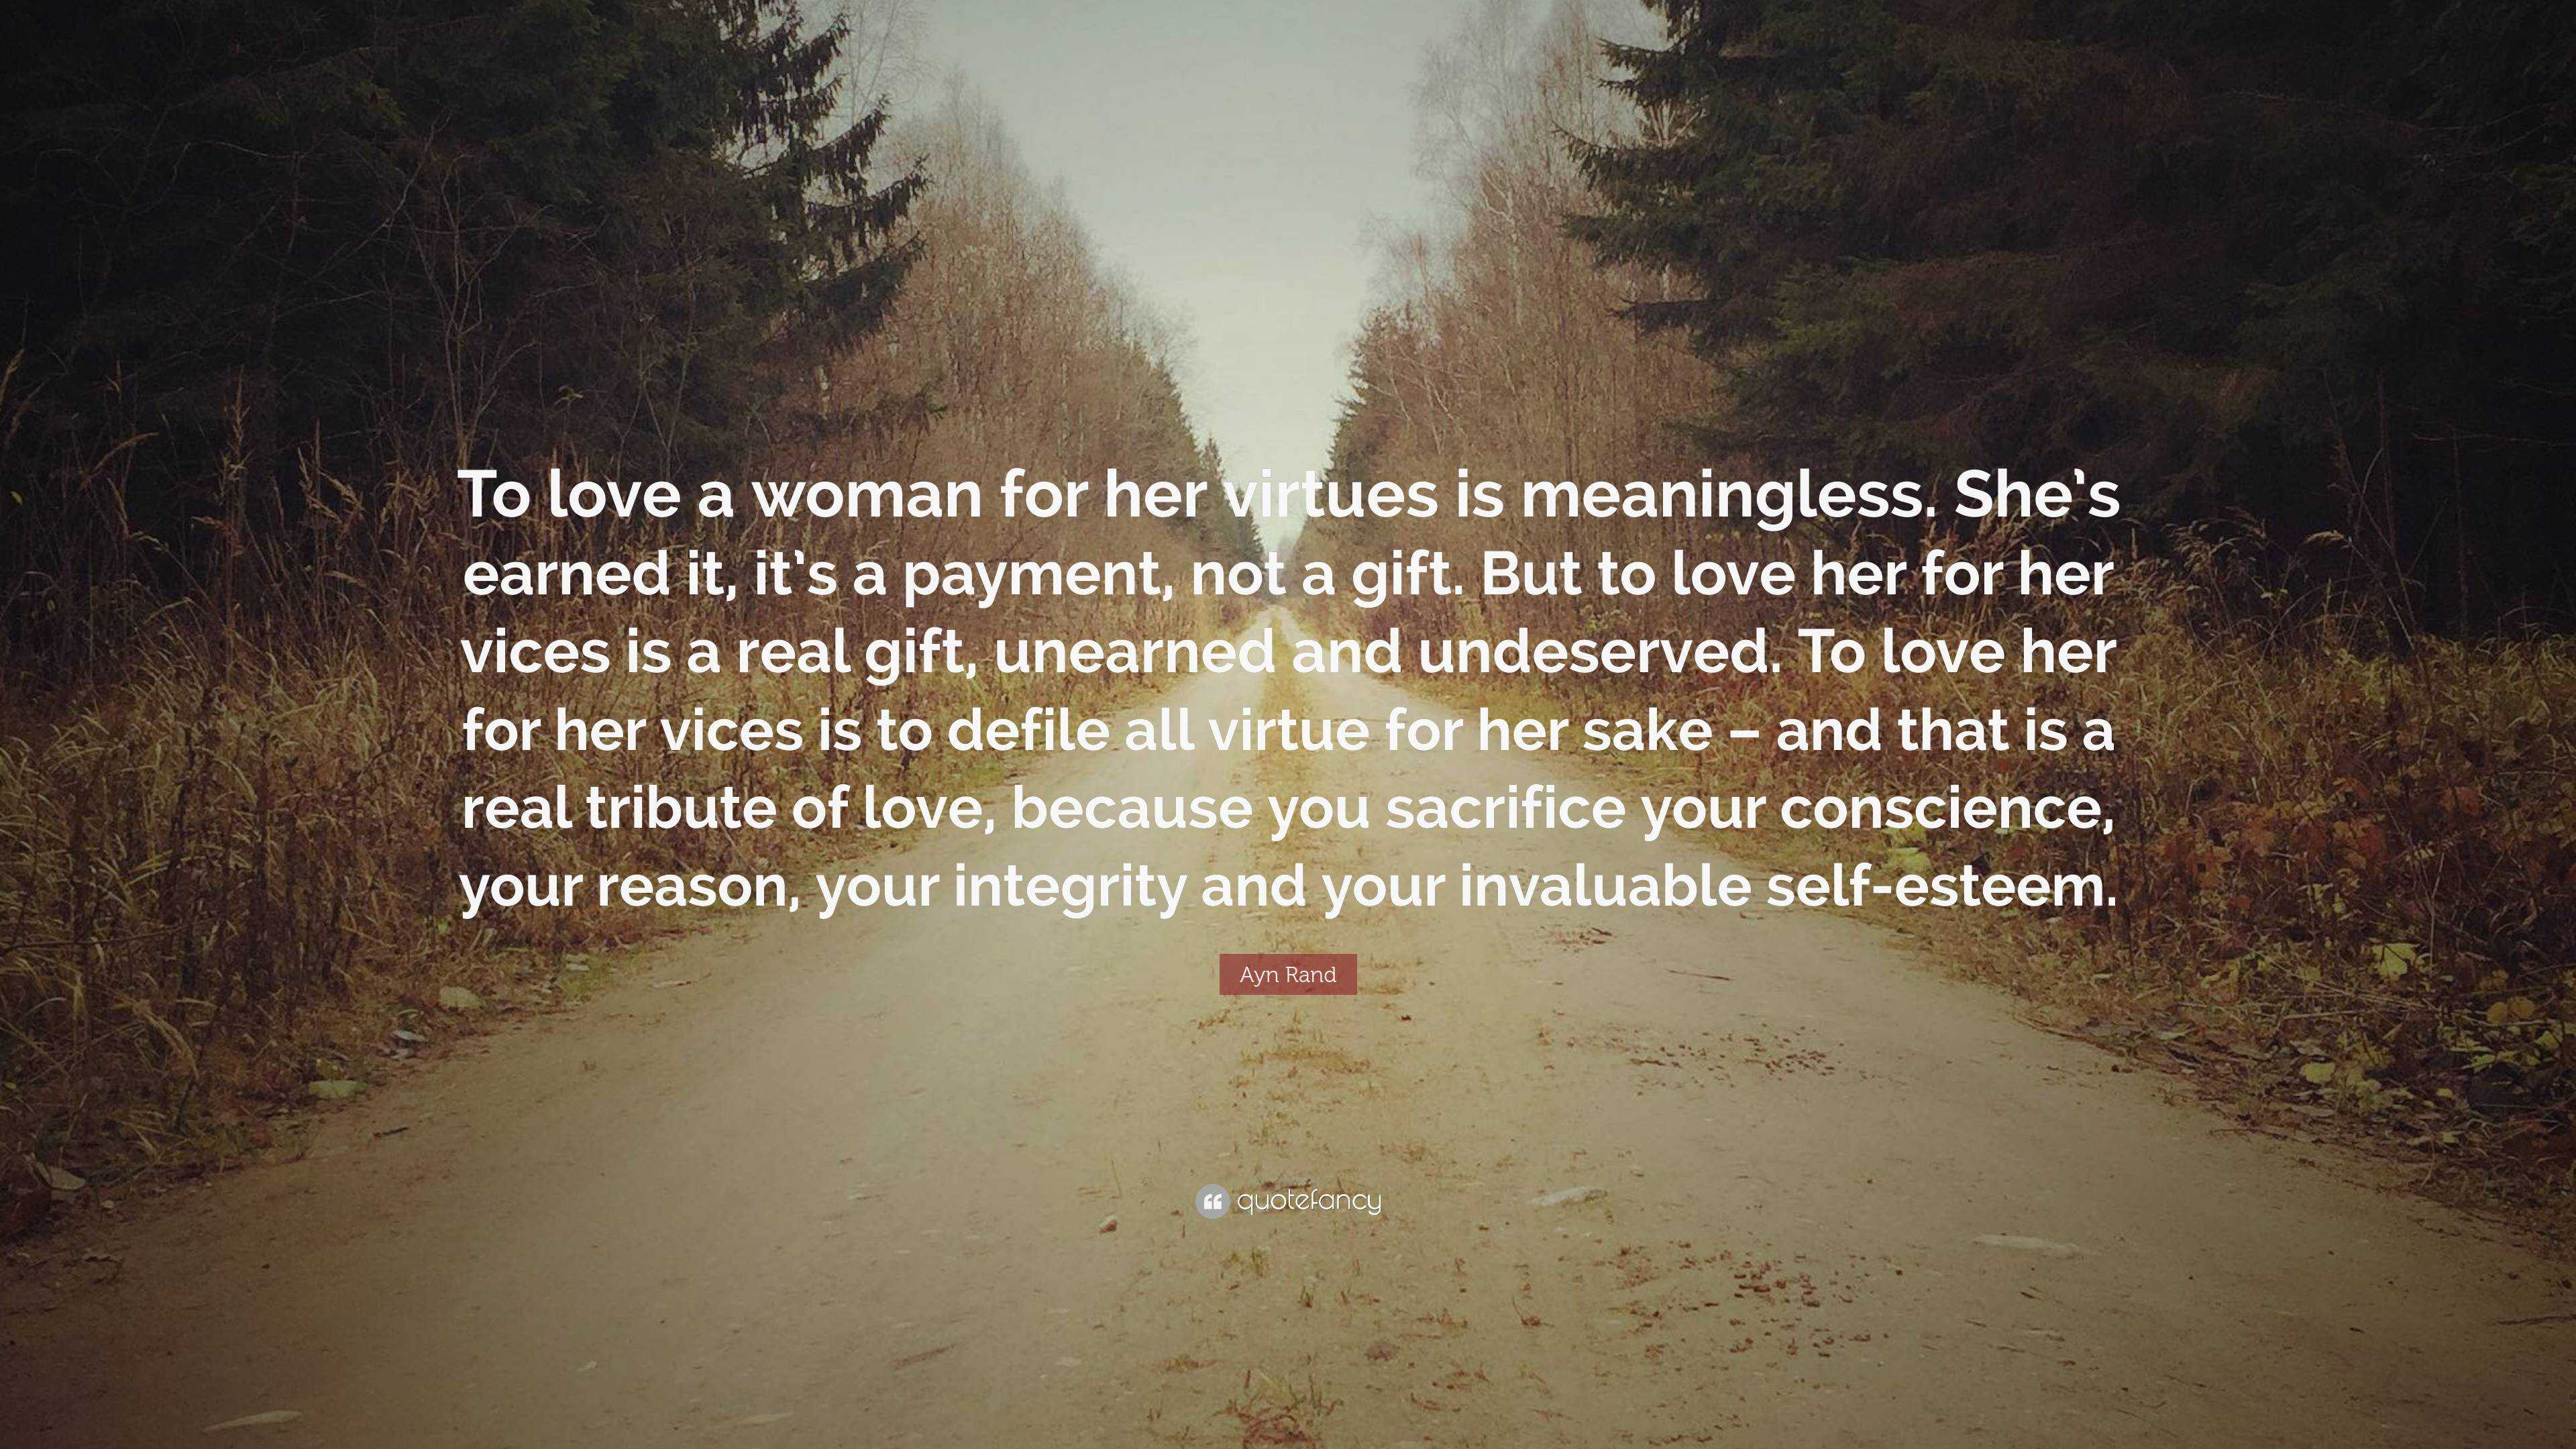 Ayn Rand Quote: “To love a woman for her virtues is meaningless. She’s ...